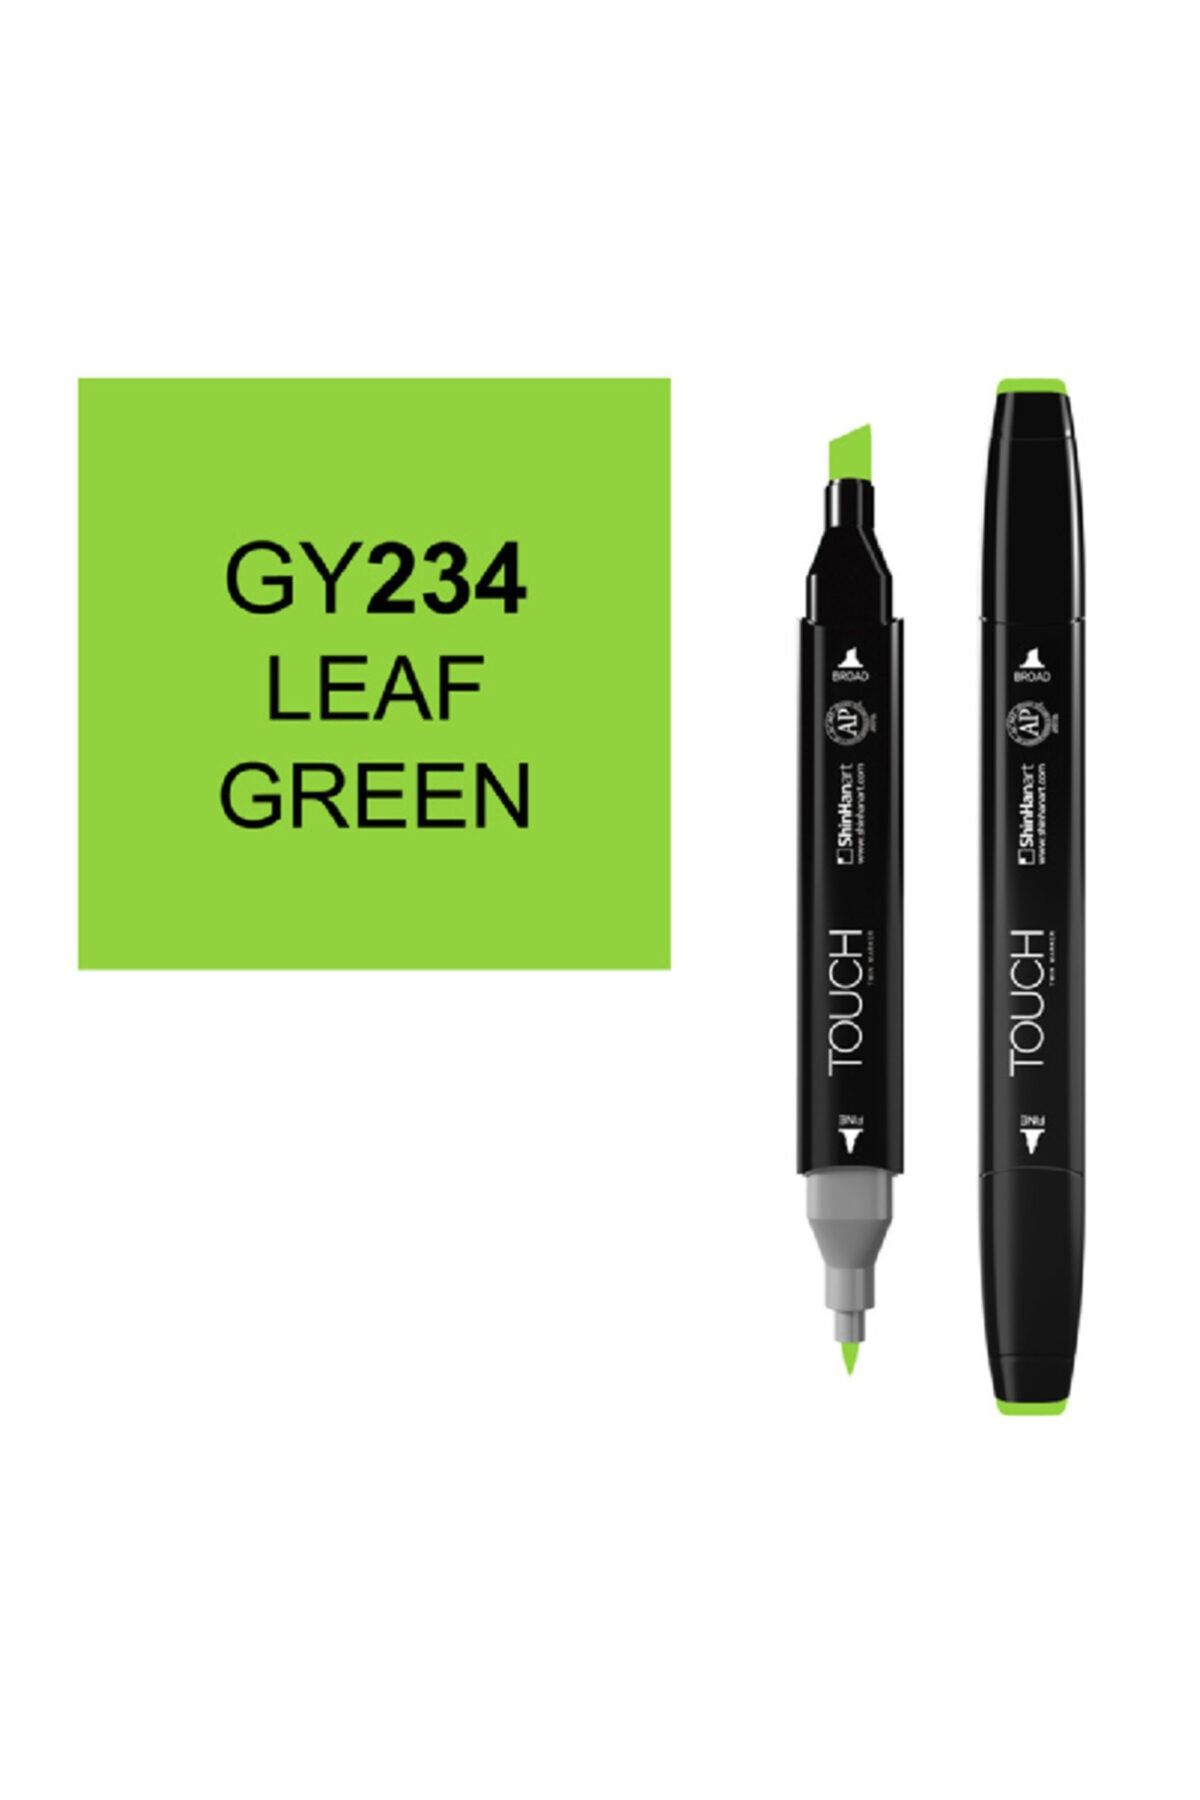 Ponart Touch Twin Gy234 Leaf Green Marker Sh1110234